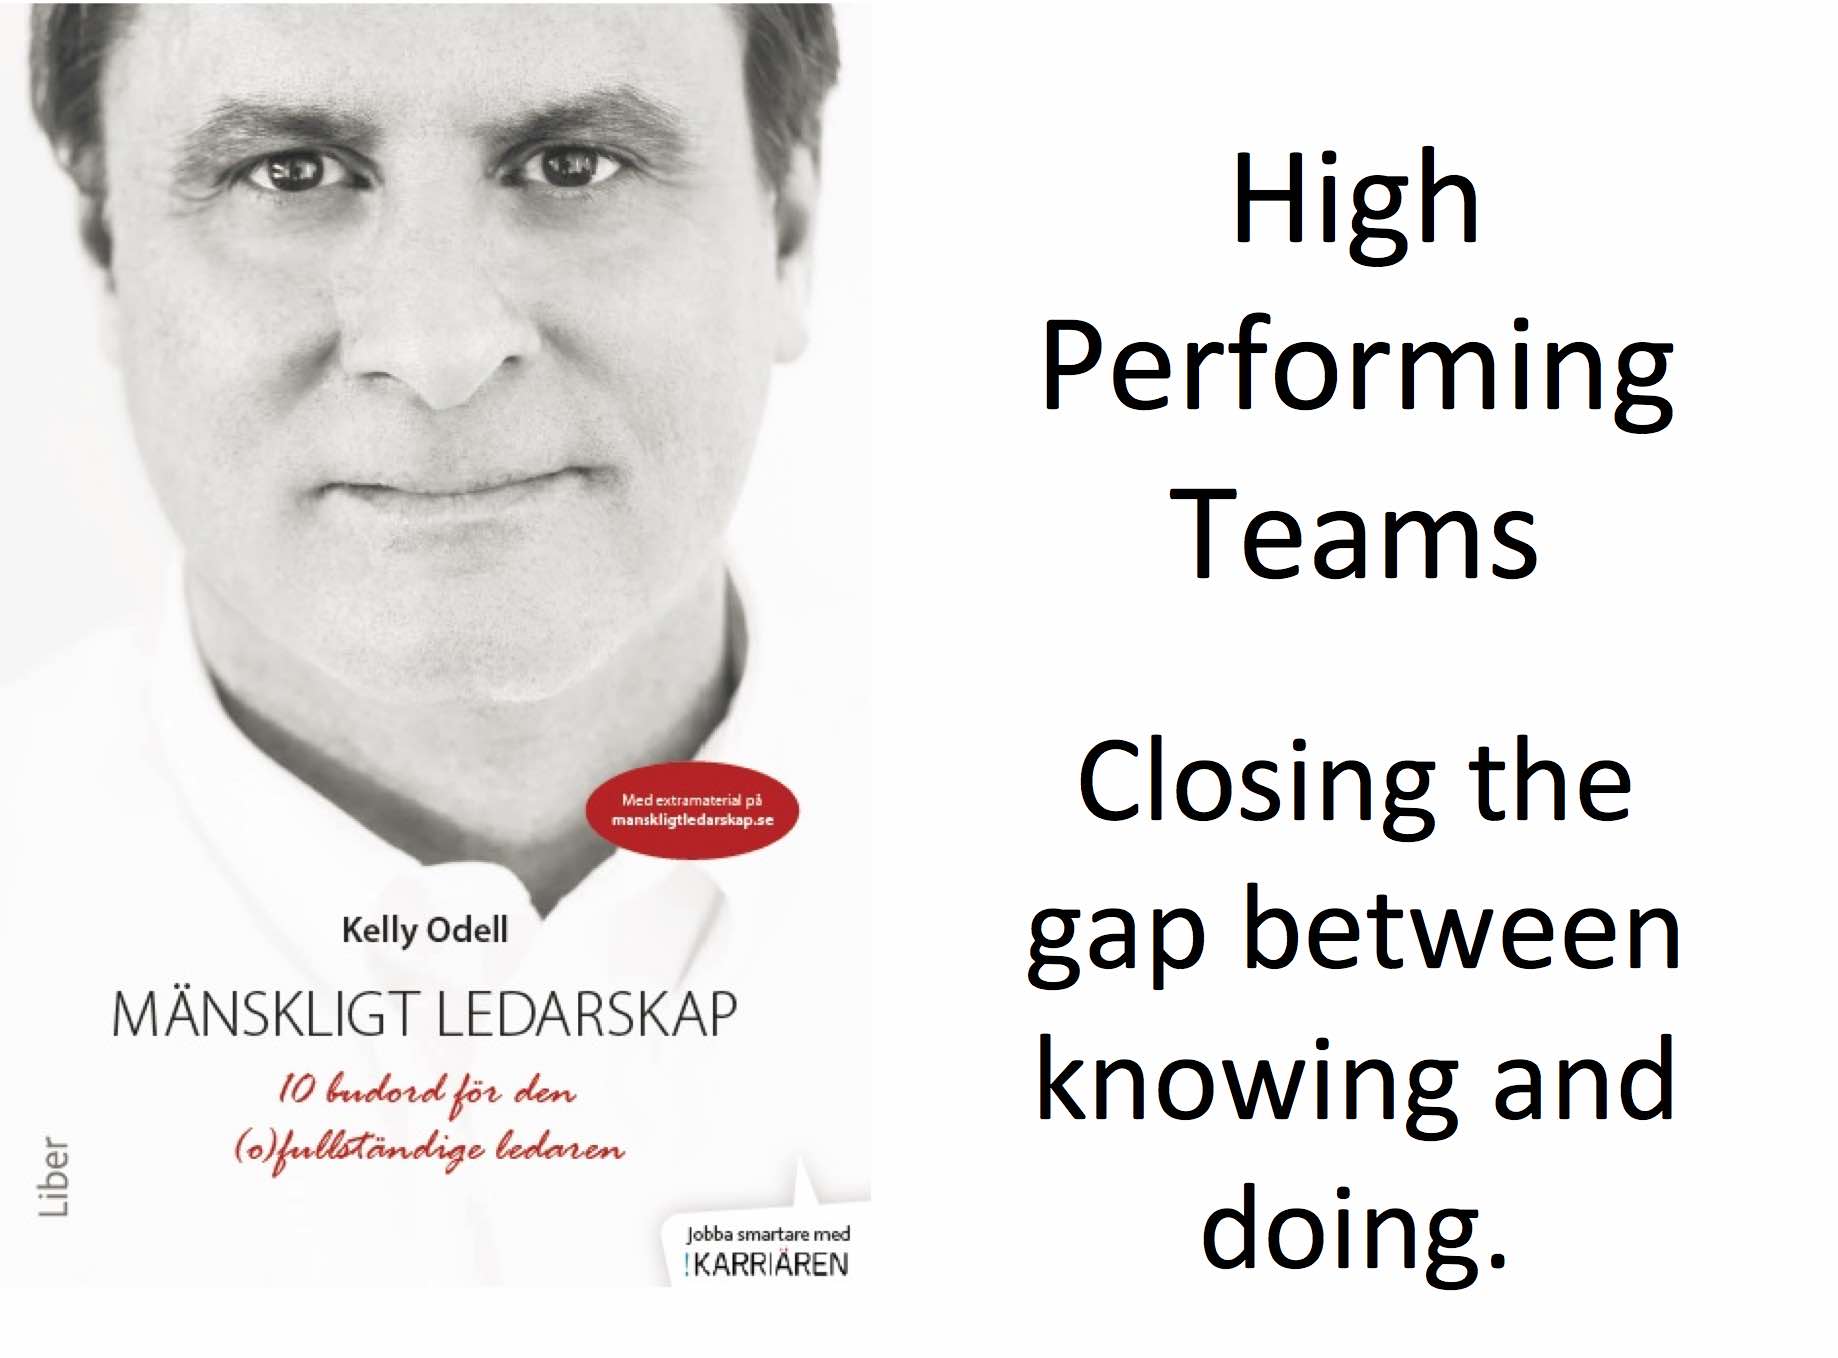 Kelly Odell presentation High Performing Teams - Closing the gap between knowing and doing.